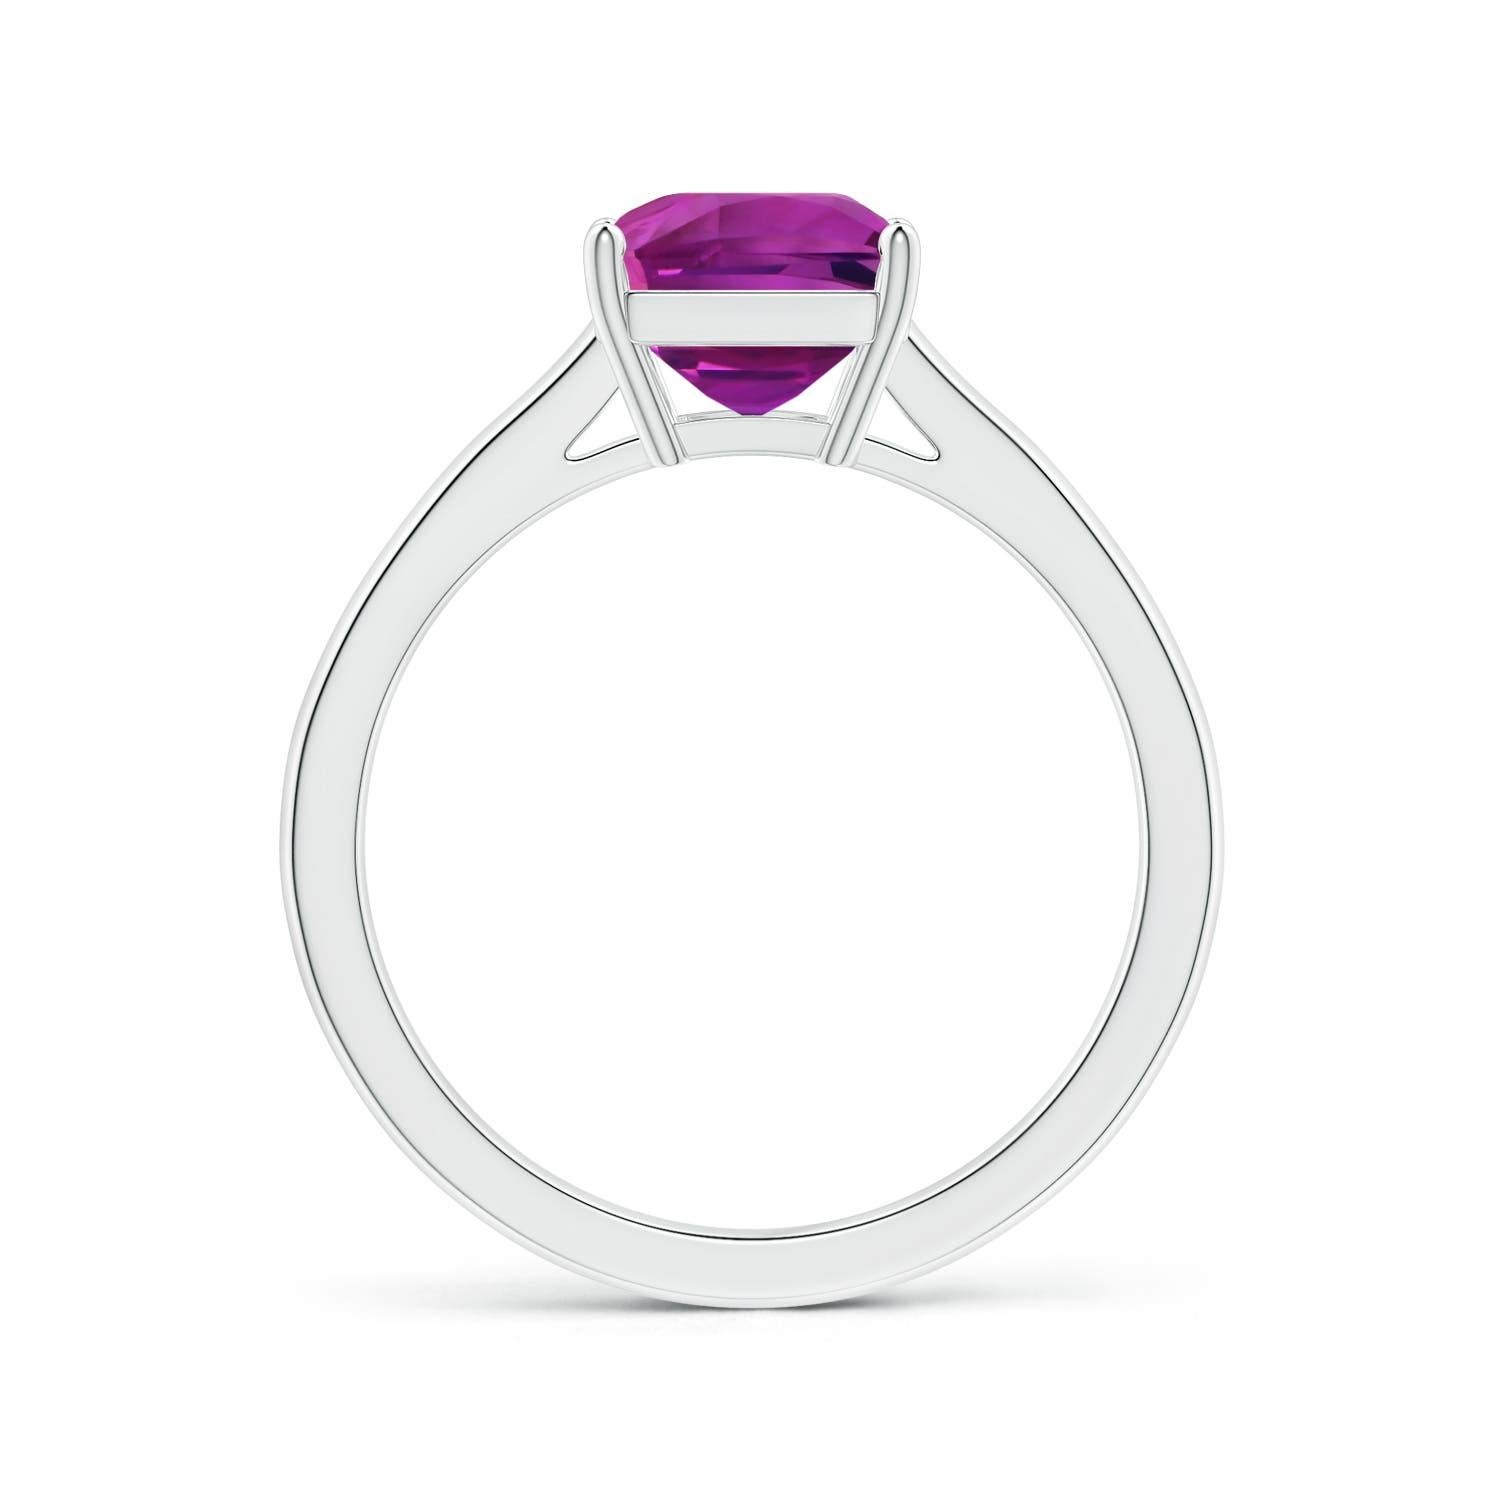 For Sale:  ANGARA GIA Certified Emerald-Cut Pink Sapphire Solitaire Ring in White Gold 2